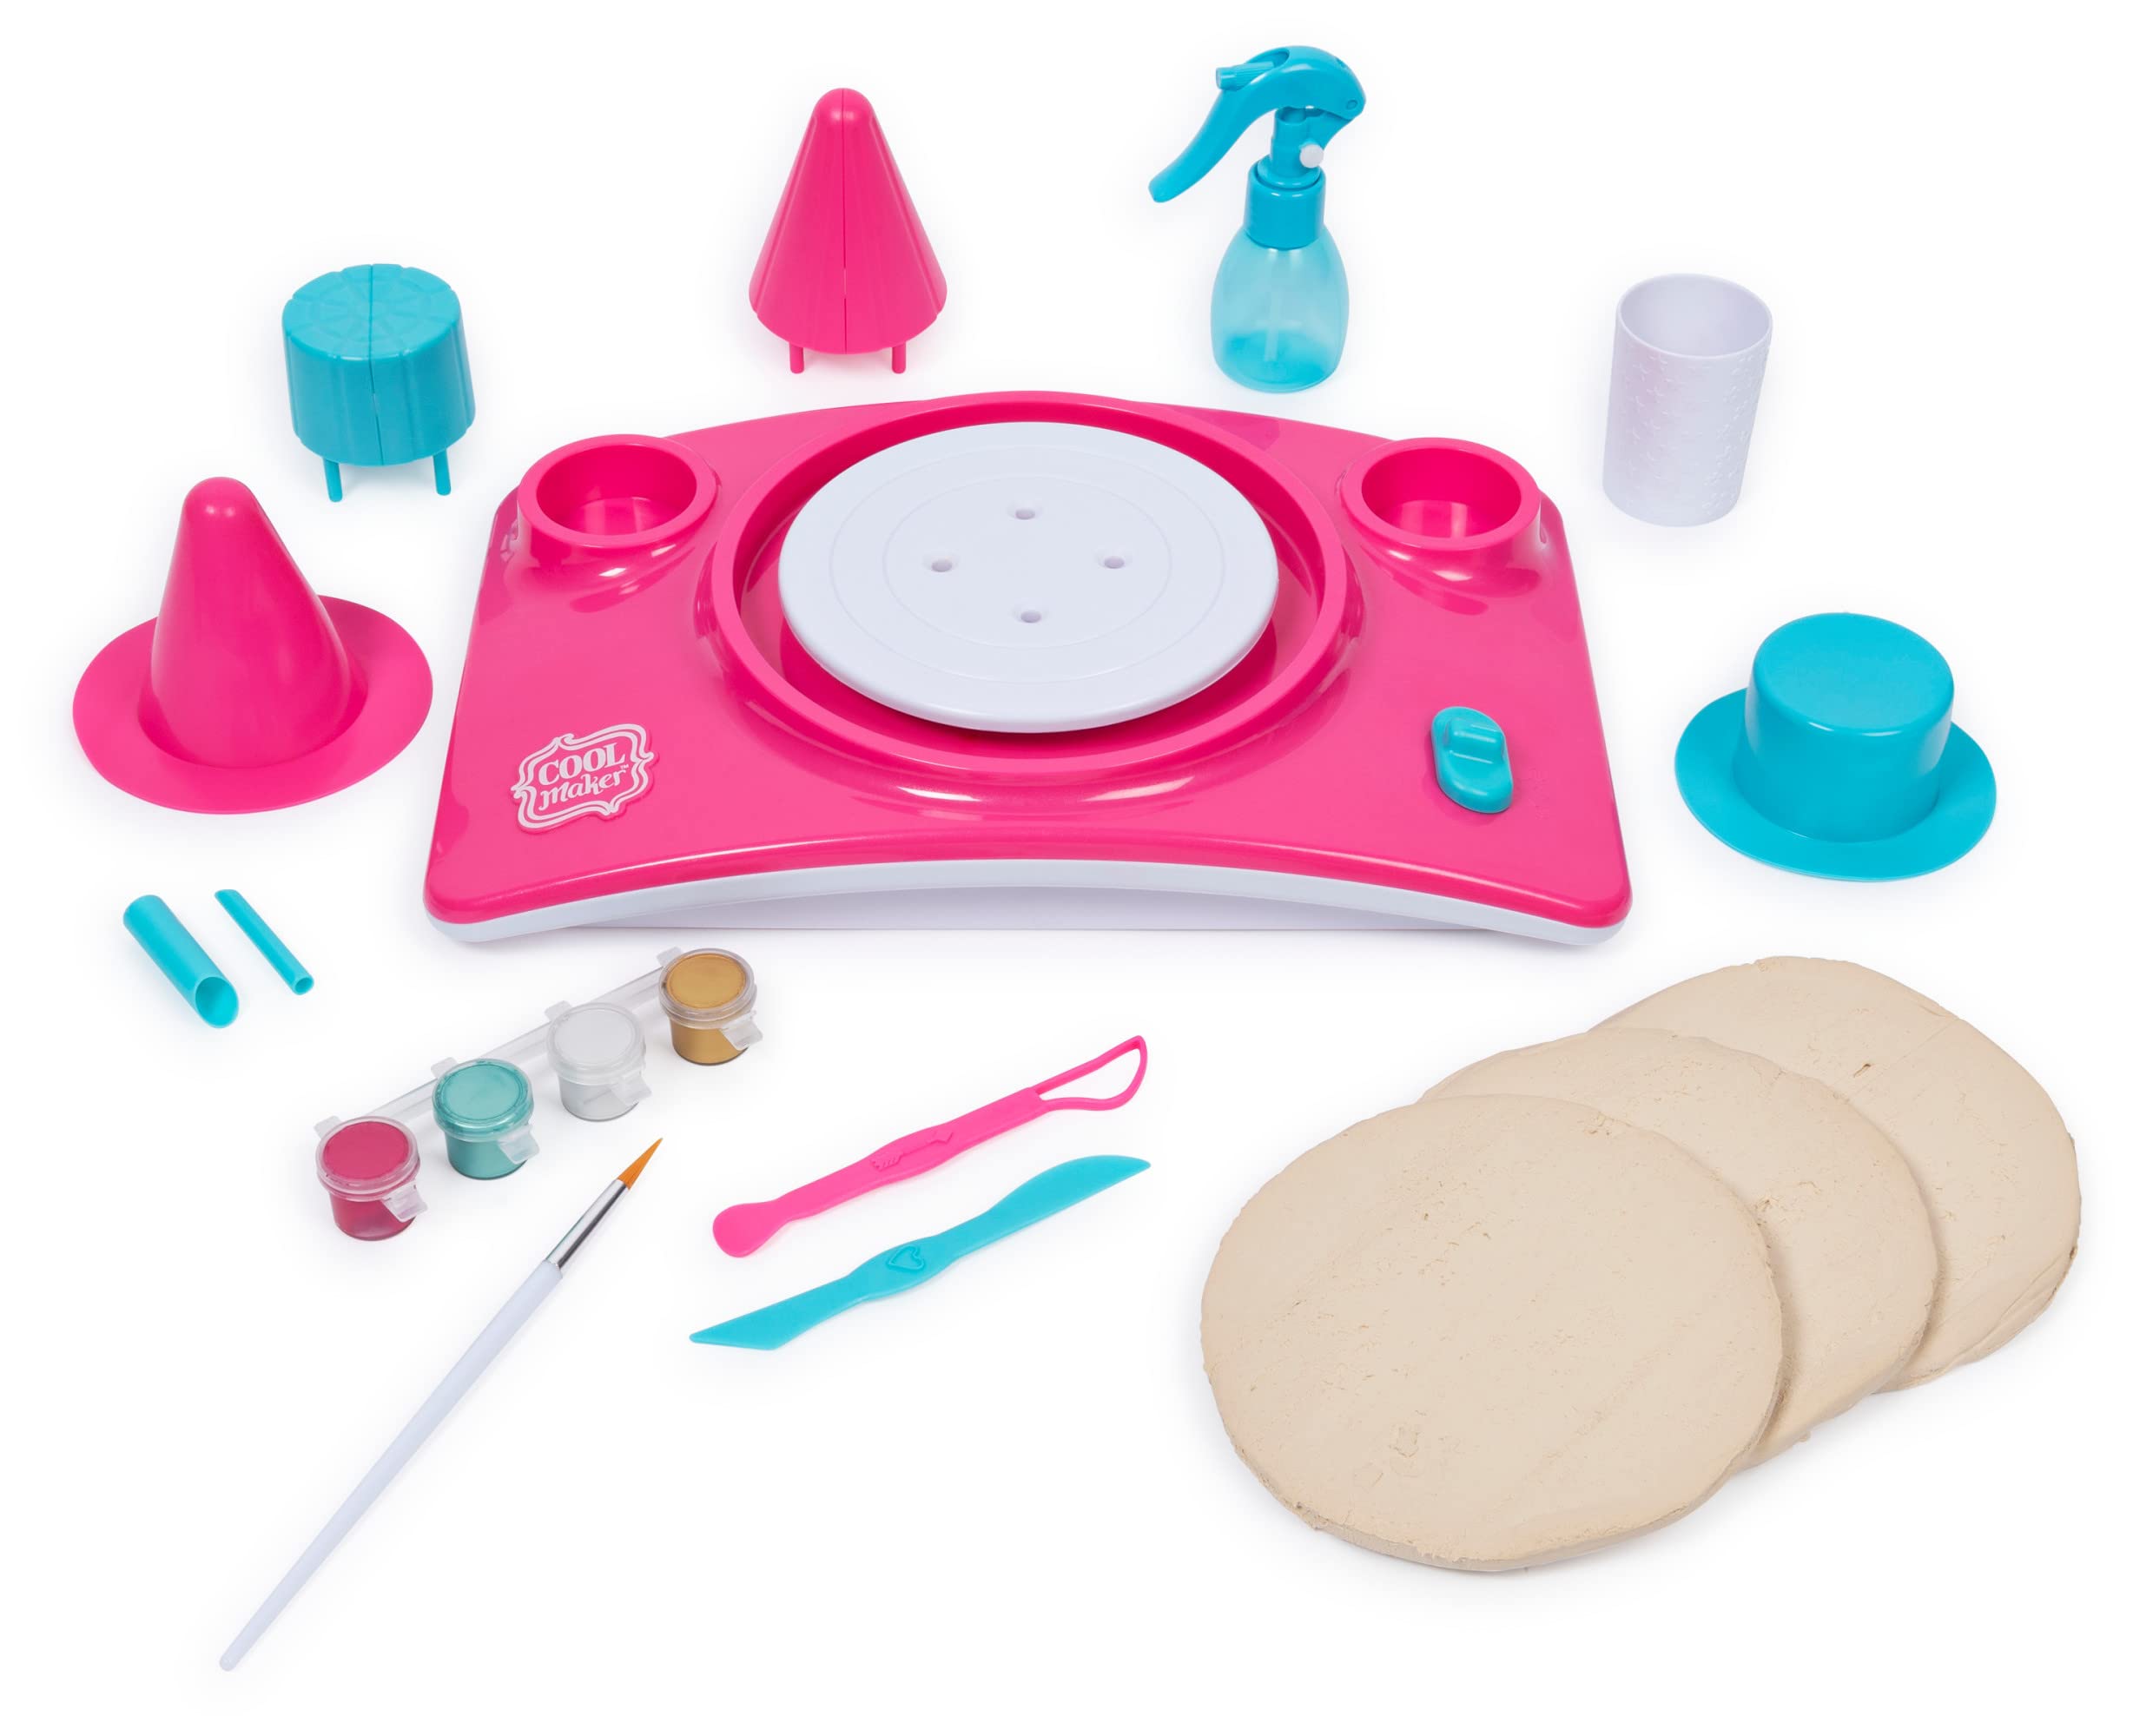 Cool Maker - Pottery Studio, Clay Pottery Wheel Craft Kit for Kids Age 6 and Up